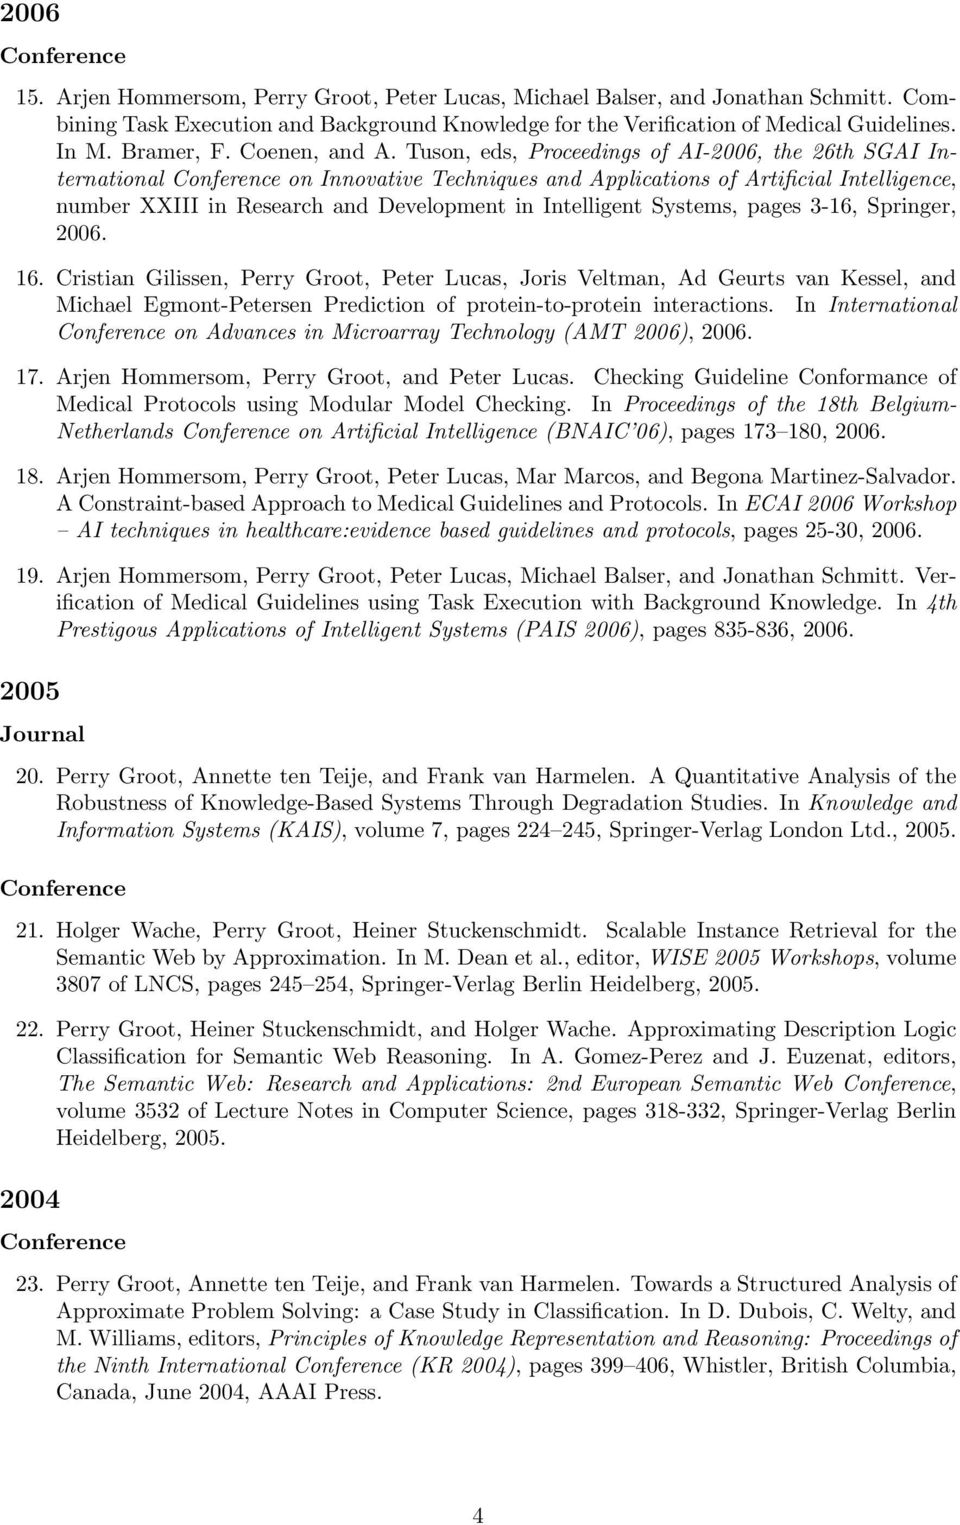 Tuson, eds, Proceedings of AI-2006, the 26th SGAI International on Innovative Techniques and Applications of Artificial Intelligence, number XXIII in Research and Development in Intelligent Systems,